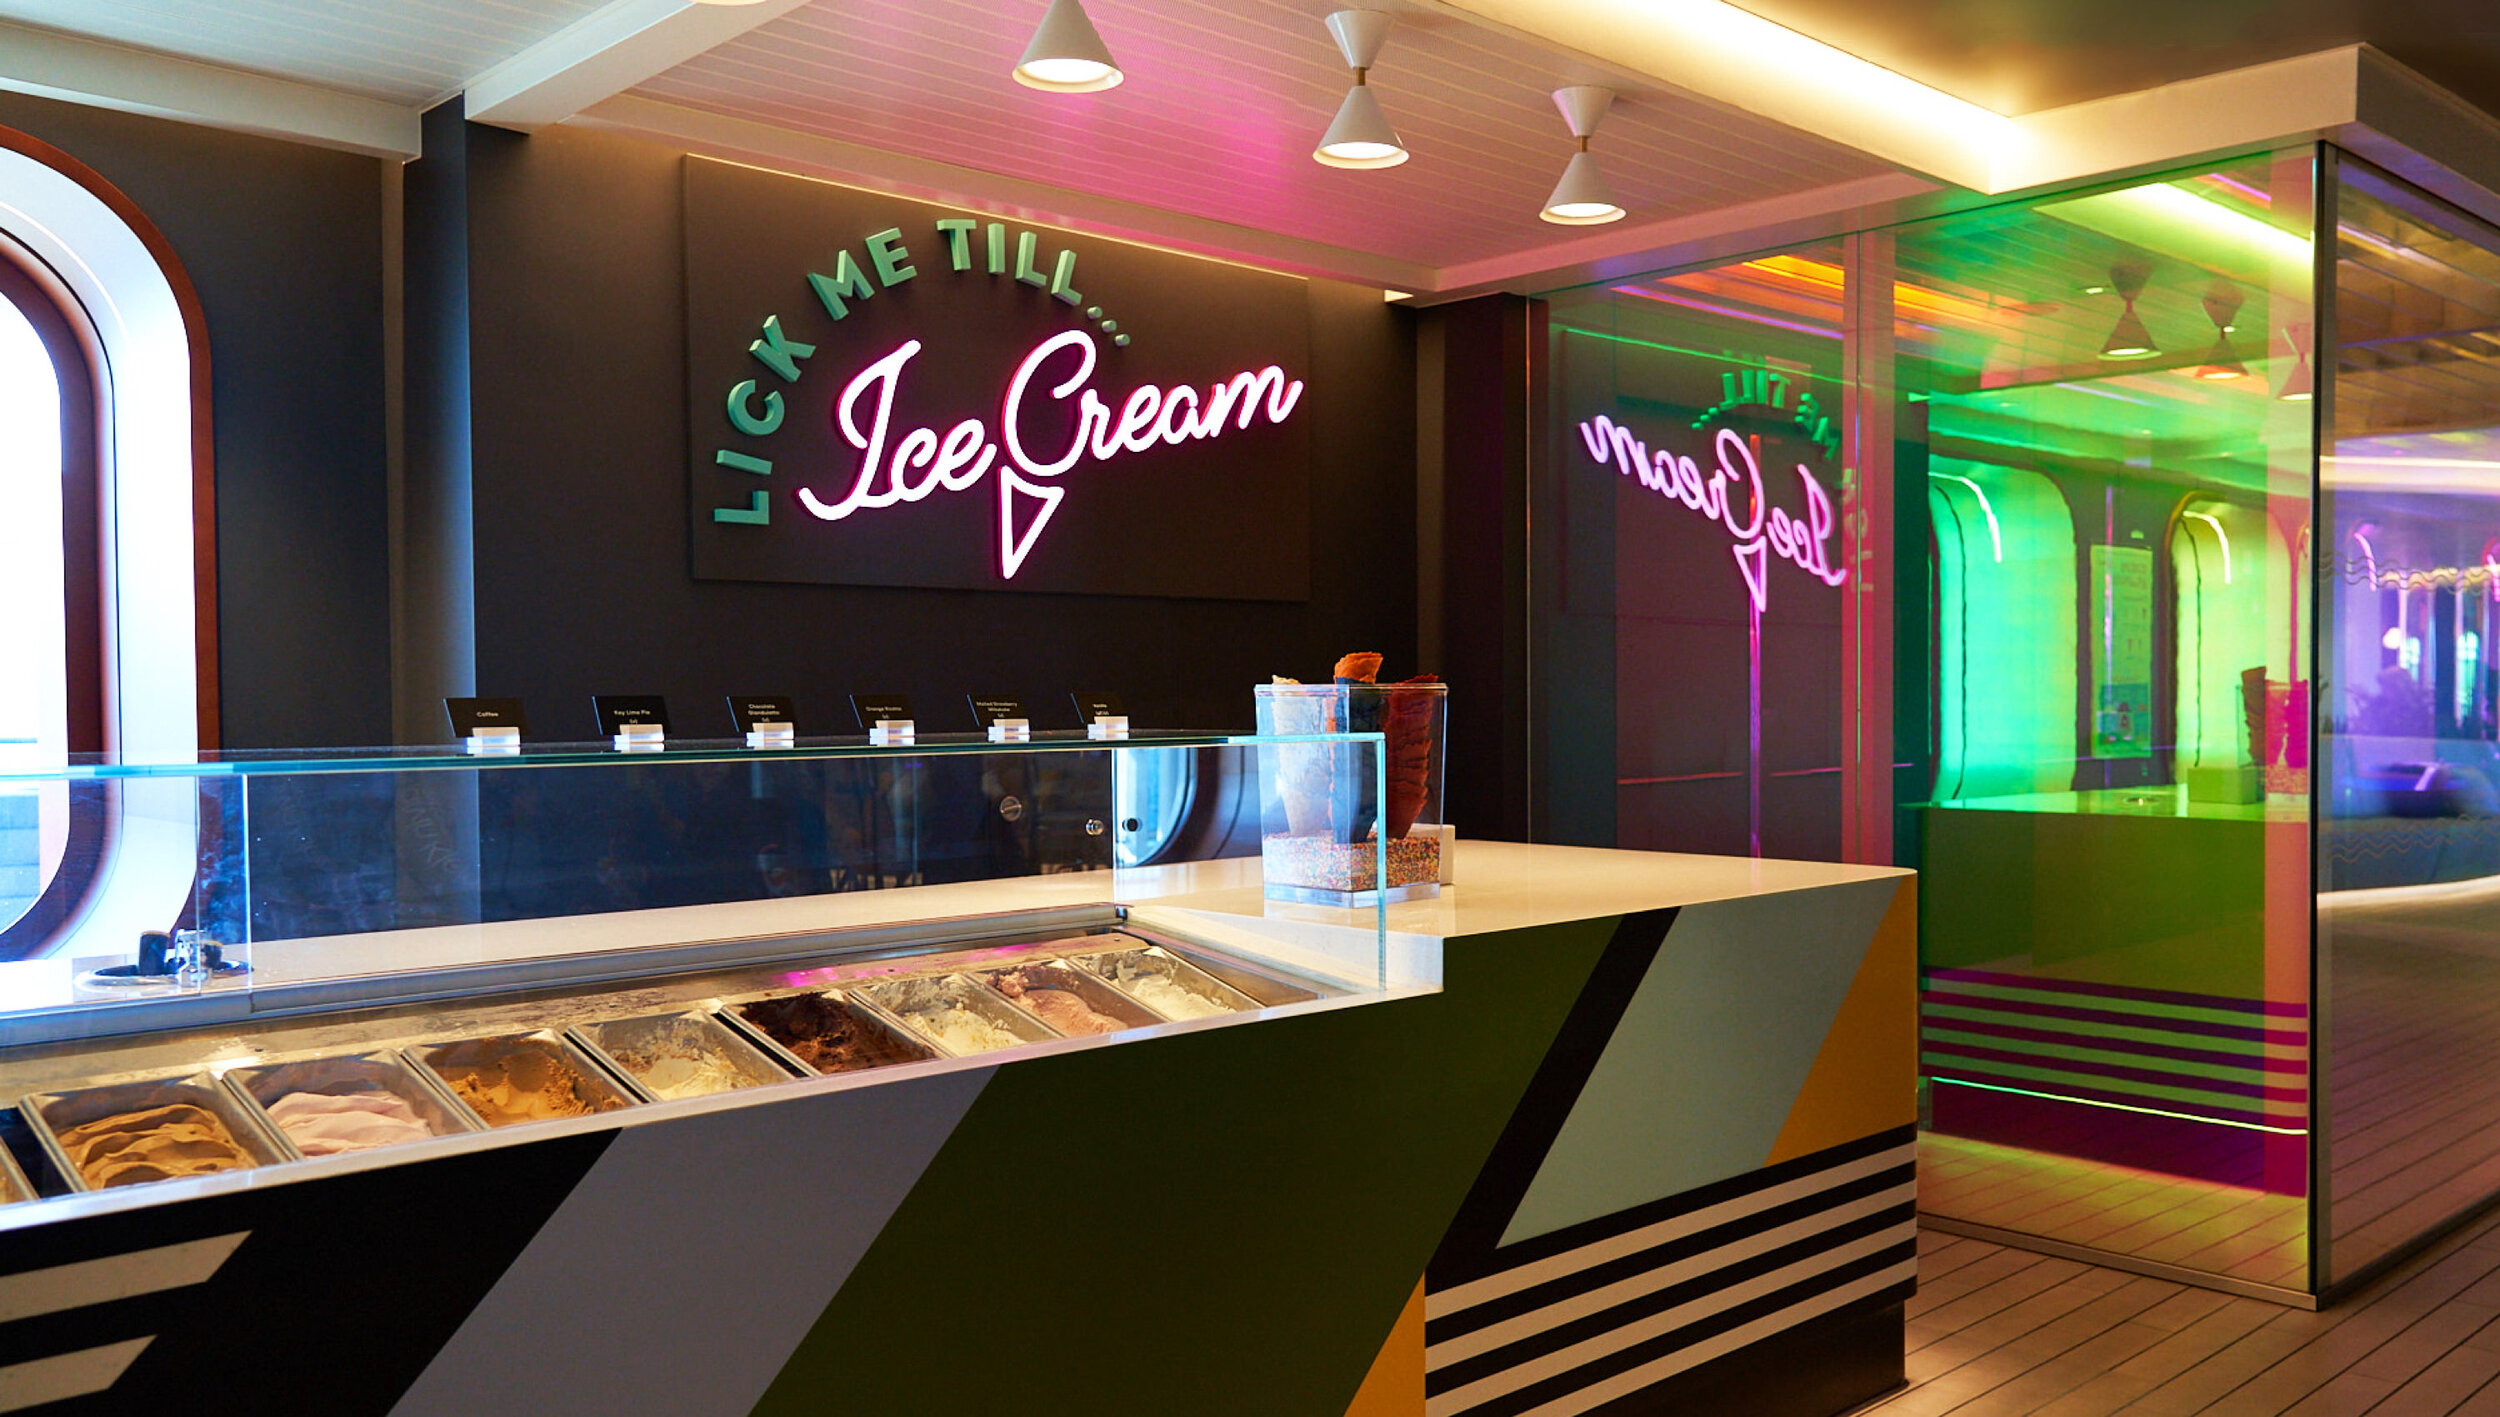 IMG-FNB-Lick-Me-Till-Ice-Cream-architectural-wide-v1-2880-3000x1700.jpg